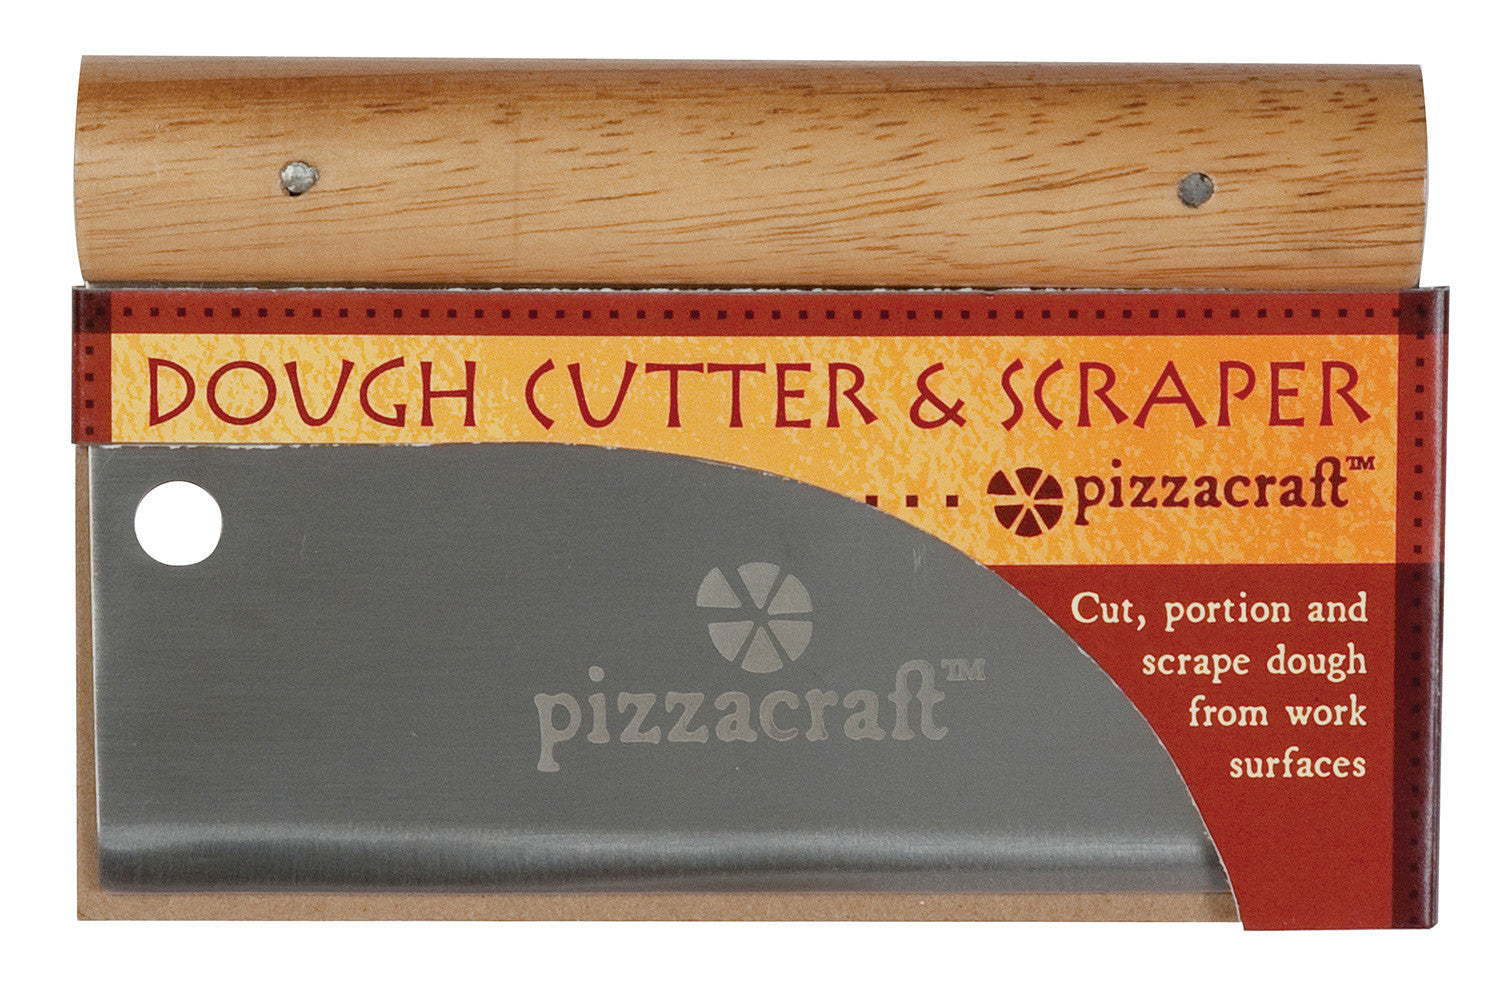 Packaging for the Stainless Steel Dough Scraper with Wood Handle